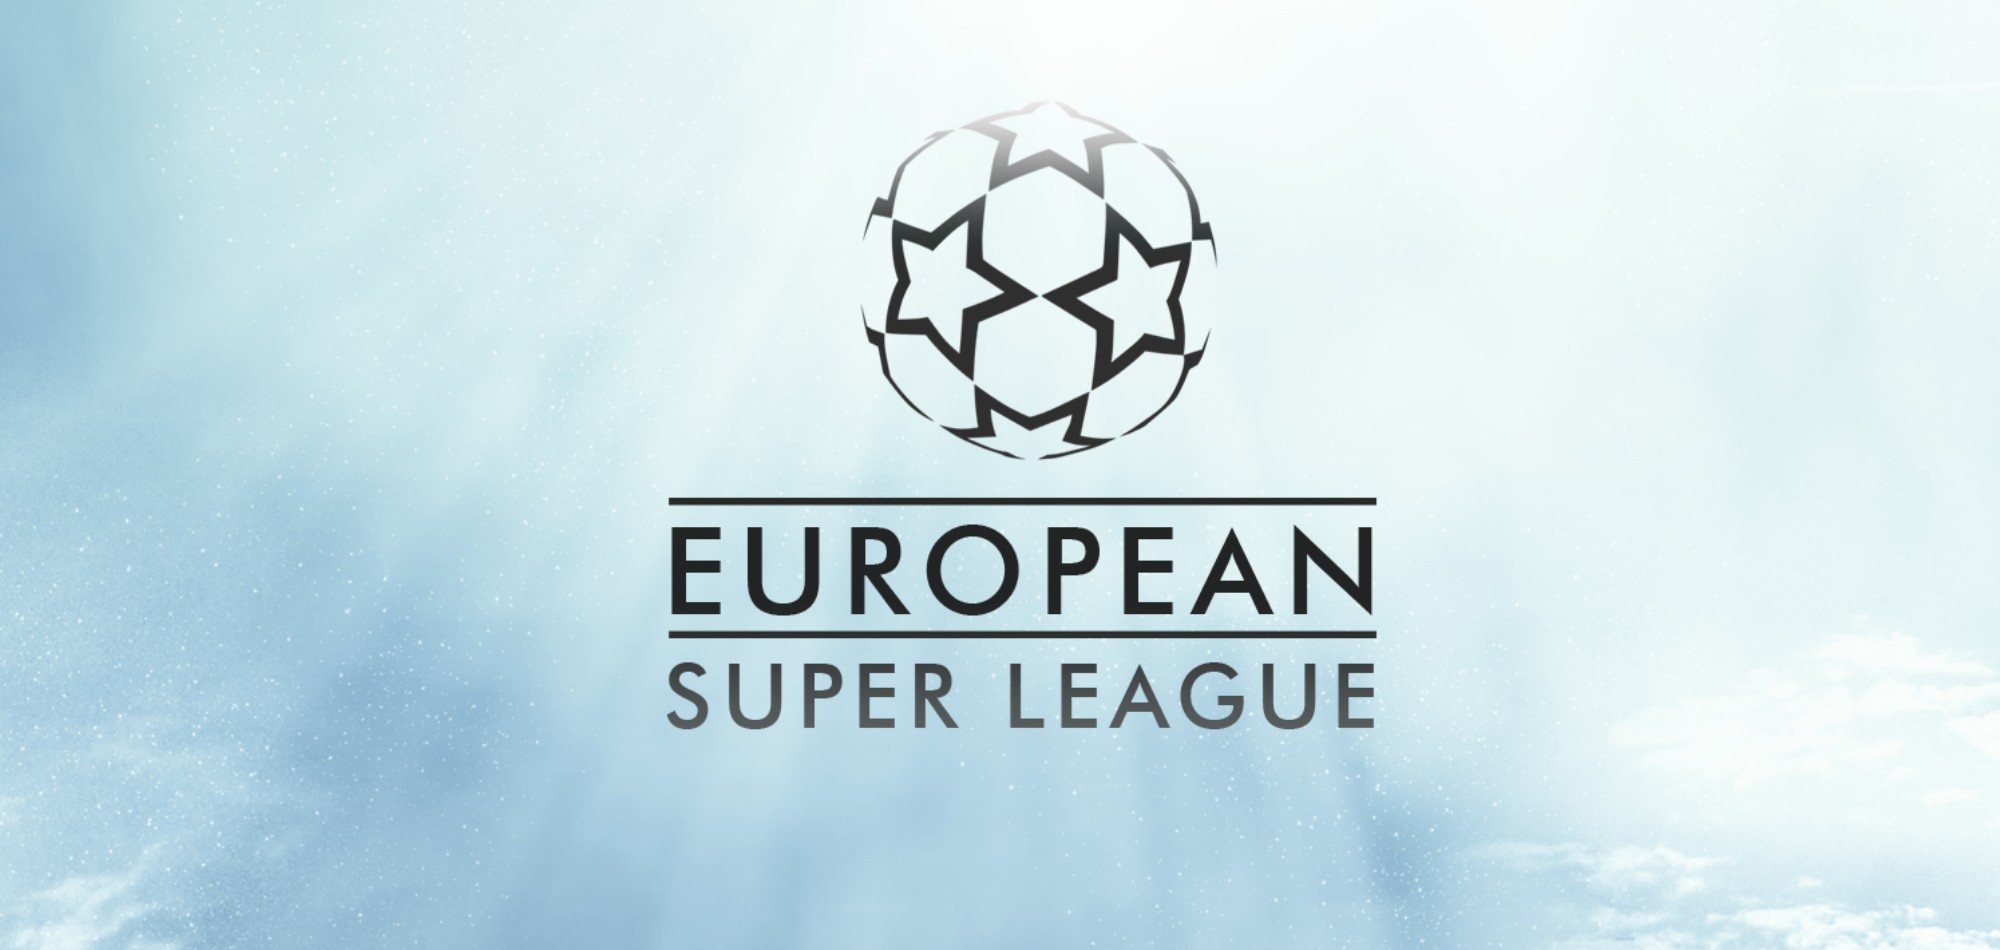 Fifa says players who compete in European Super League will be barred from its competitions